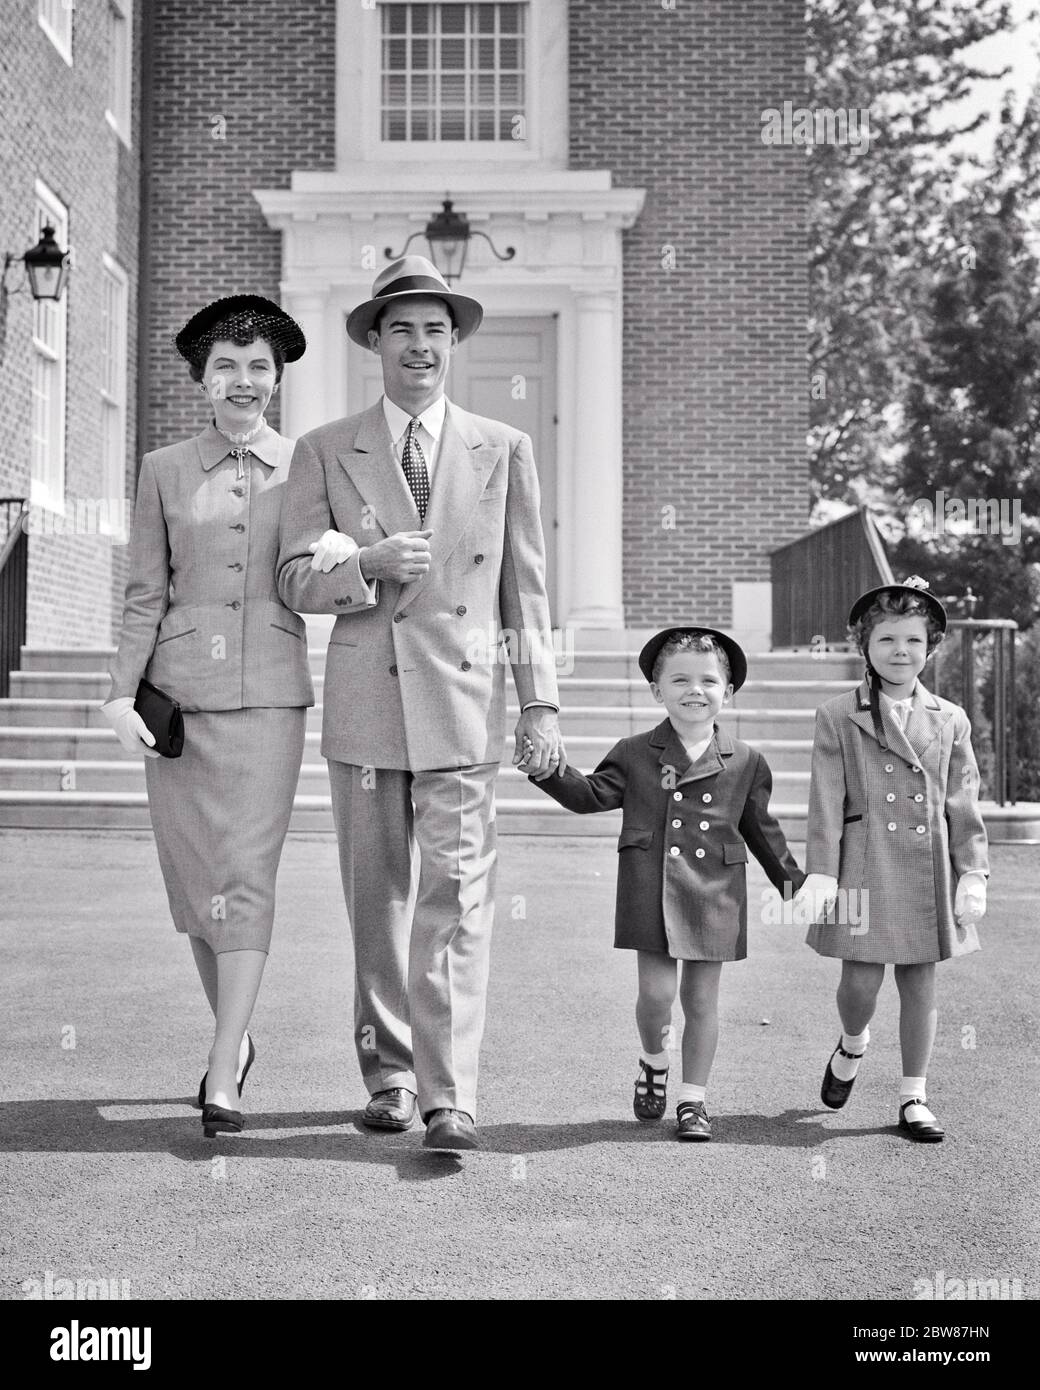 1950s FAMILY OF FOUR DRESSED IN THEIR SUNDAY BEST CLOTHES WALKING AWAY FROM CHURCH BUILDING SMILING MOTHER FATHER BOY GIRL - c4683 HAR001 HARS SUBURBAN SPRING MOTHERS OLD TIME NOSTALGIA BROTHER OLD FASHION SISTER JUVENILE STYLE COMMUNICATION TEAMWORK BEST PLEASED FAMILIES JOY LIFESTYLE SATISFACTION RELIGION FEMALES EASTER MARRIED SUNDAY BROTHERS SPOUSE HUSBANDS COATS HEALTHINESS COPY SPACE FRIENDSHIP FULL-LENGTH LADIES PERSONS INSPIRATION AWAY FESTIVAL MALES CHRISTIAN SIBLINGS SPIRITUALITY CONFIDENCE SISTERS FATHERS B&W PARTNER SUIT AND TIE HAPPINESS CHEERFUL LEISURE RELIGIOUS CHRISTIANITY Stock Photo